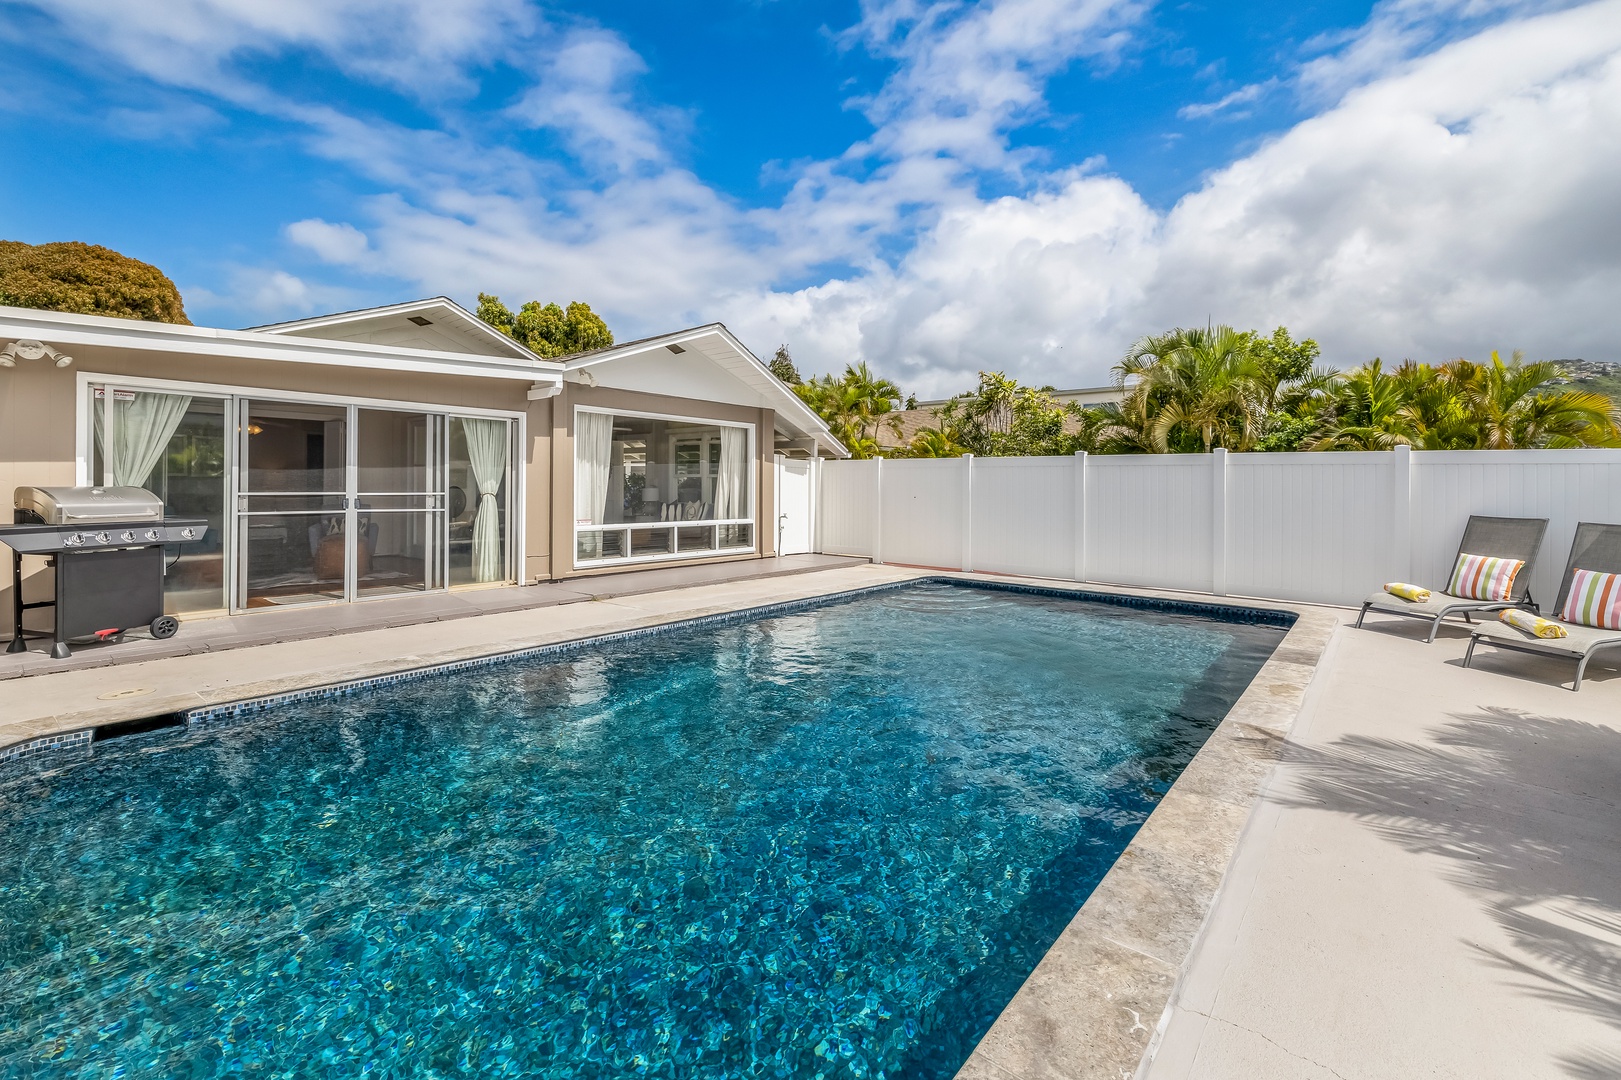 Honolulu Vacation Rentals, Kahala Cottage - Enjoy a relaxing dip in the private pool.